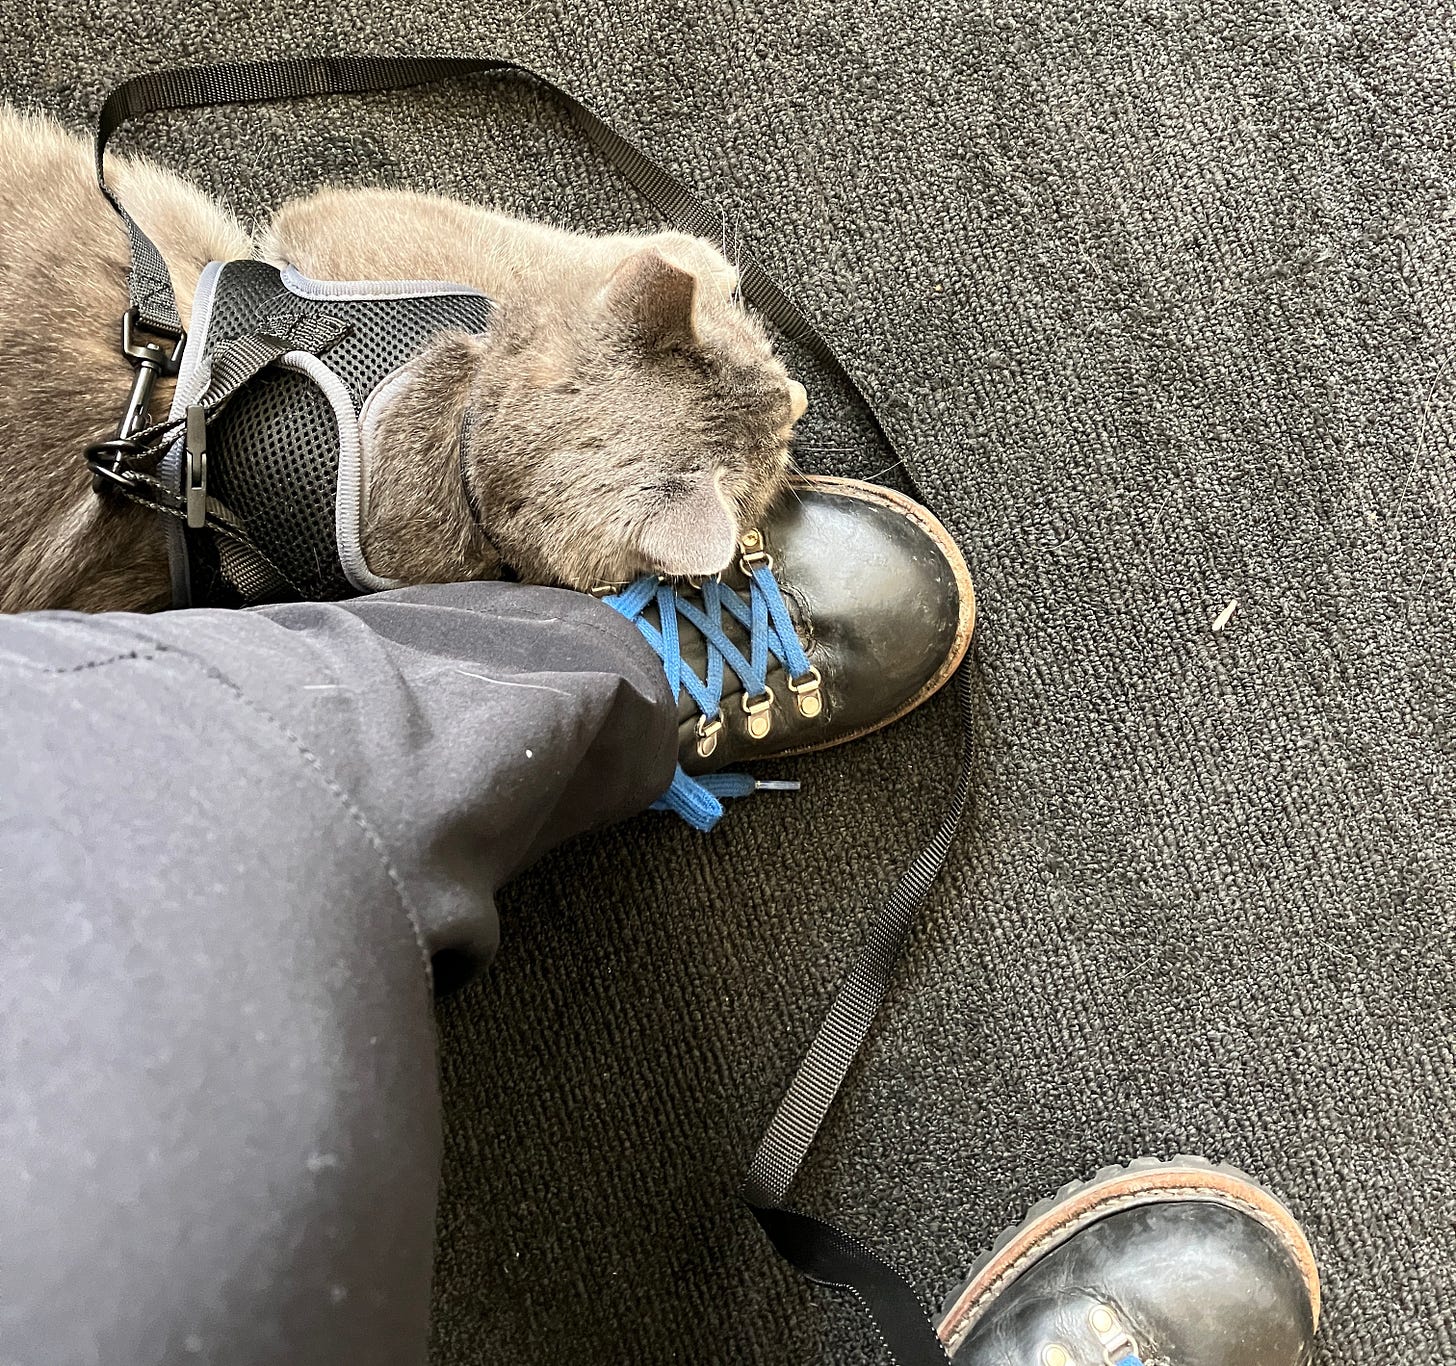 My cat on a leash in the Philadelphia Airport next to my shoe with blue laces.